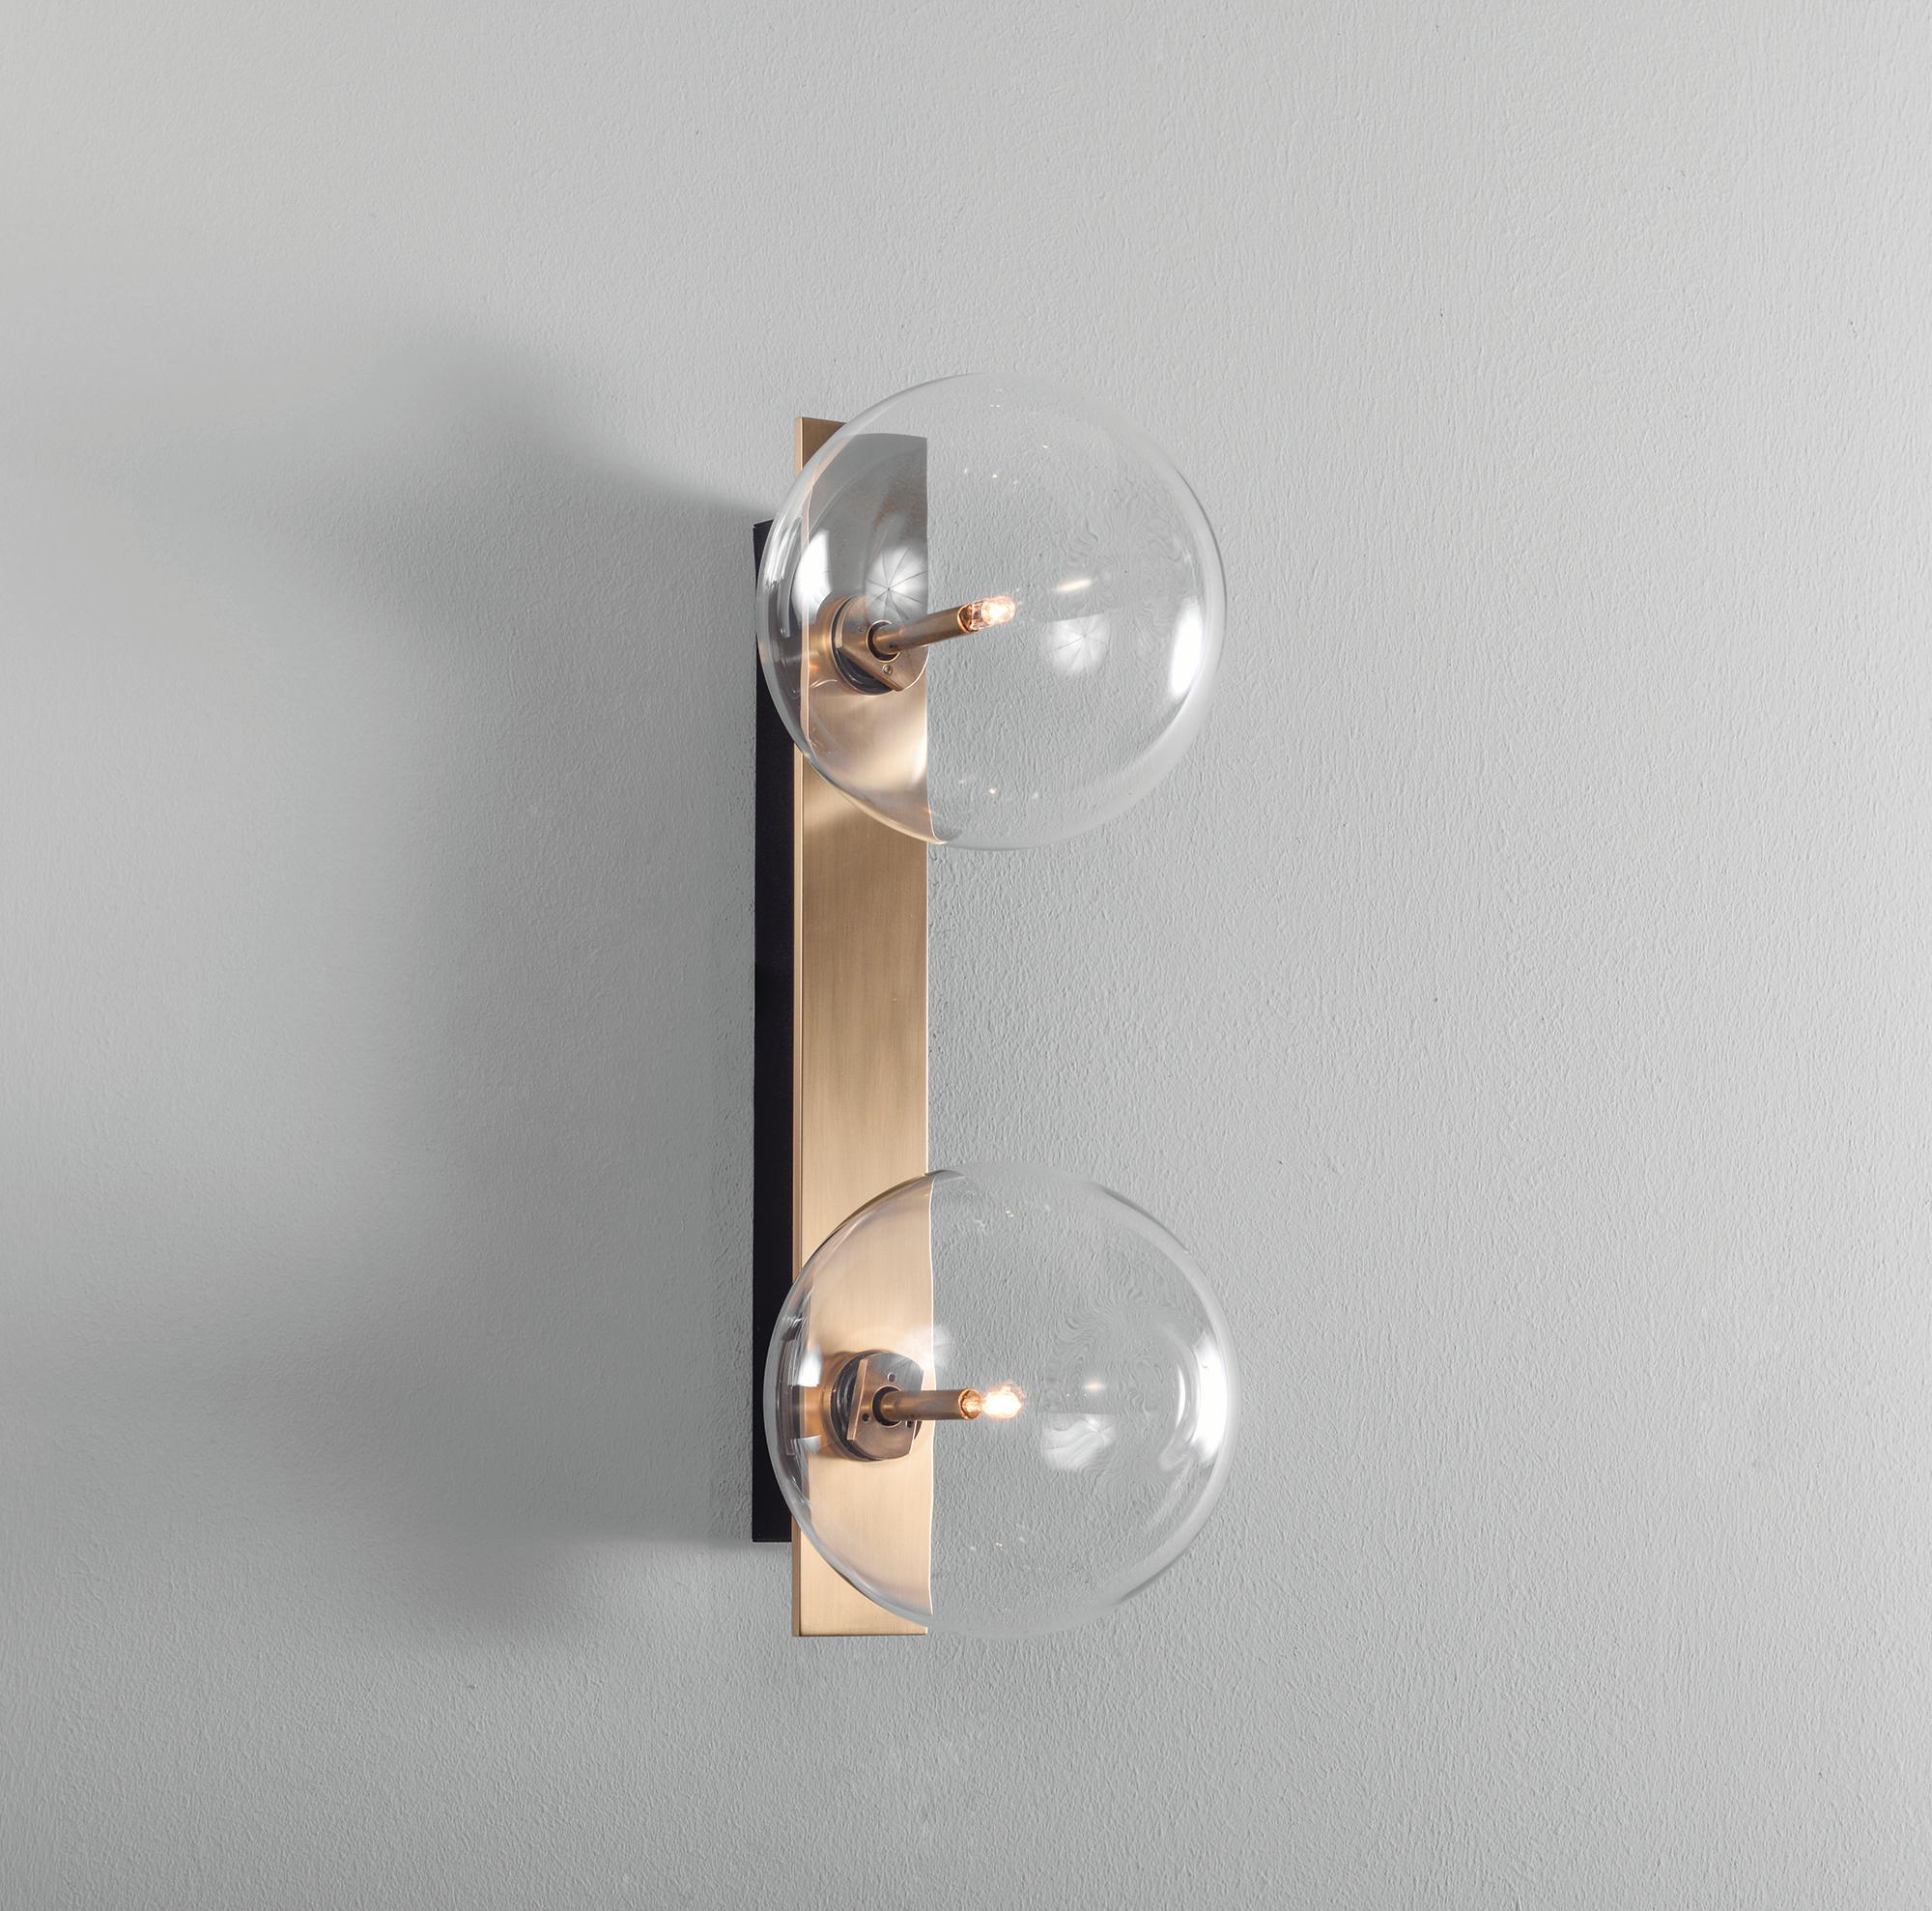 Oslo Dual Brass Wall Sconce by Schwung
Dimensions: W 15 x D 19 x H 40 cm
Materials: Solid brass, hand blown glass globes

Finishes available: Black gunmetal, polished nickel, brass


Schwung is a German word, and loosely defined, means energy